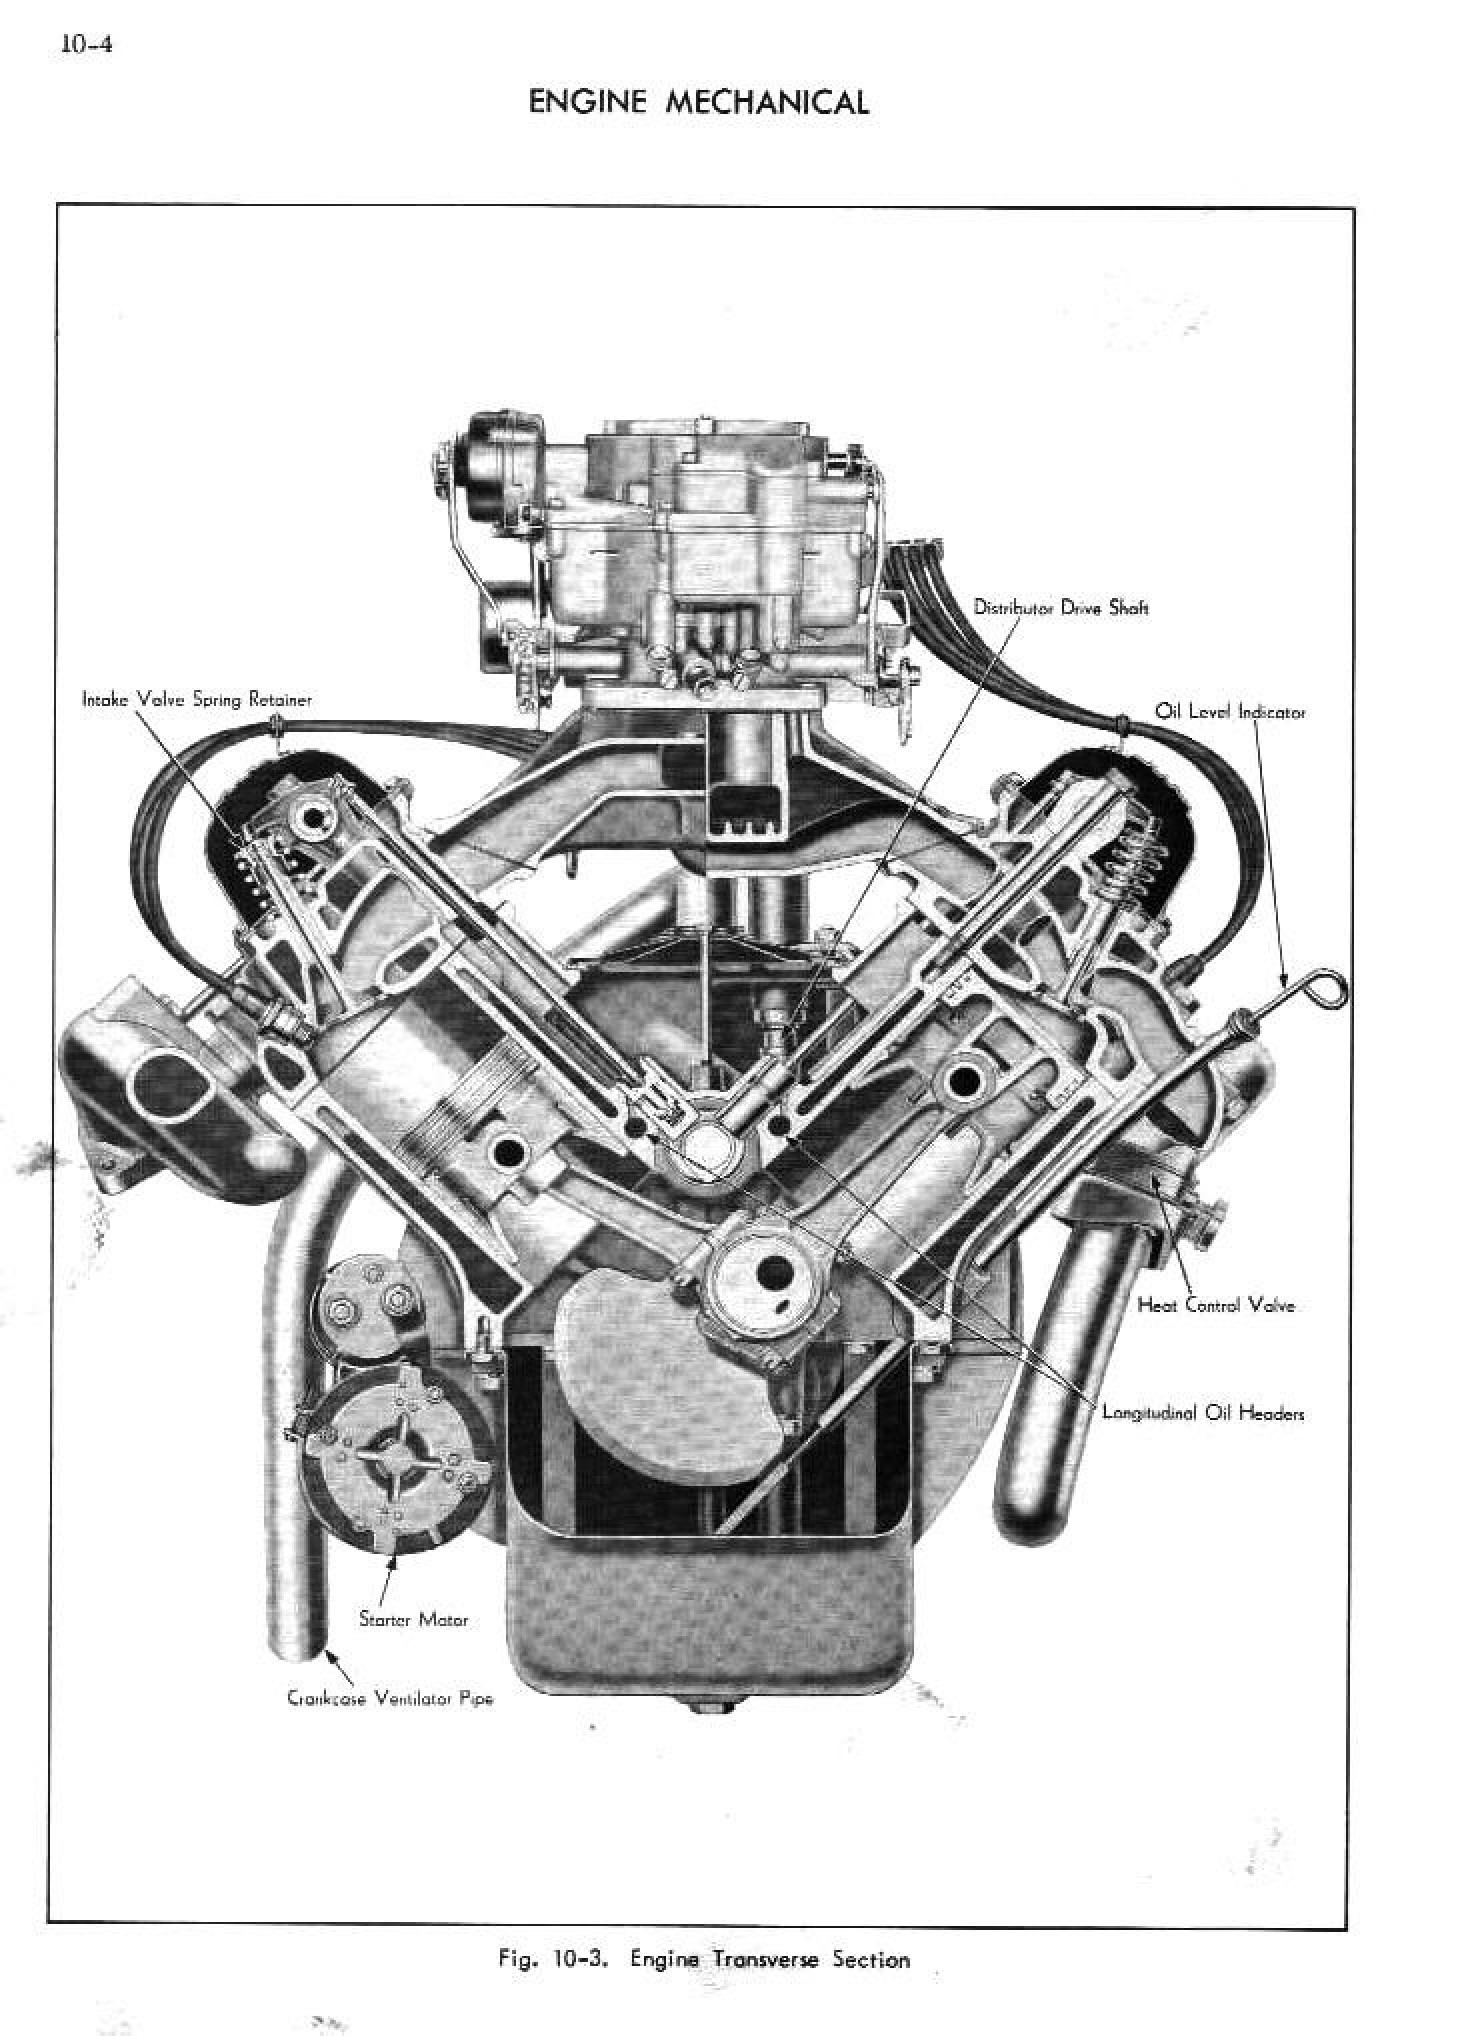 1952 Cadillac Shop Manual- Engine Mechanical Page 4 of 36